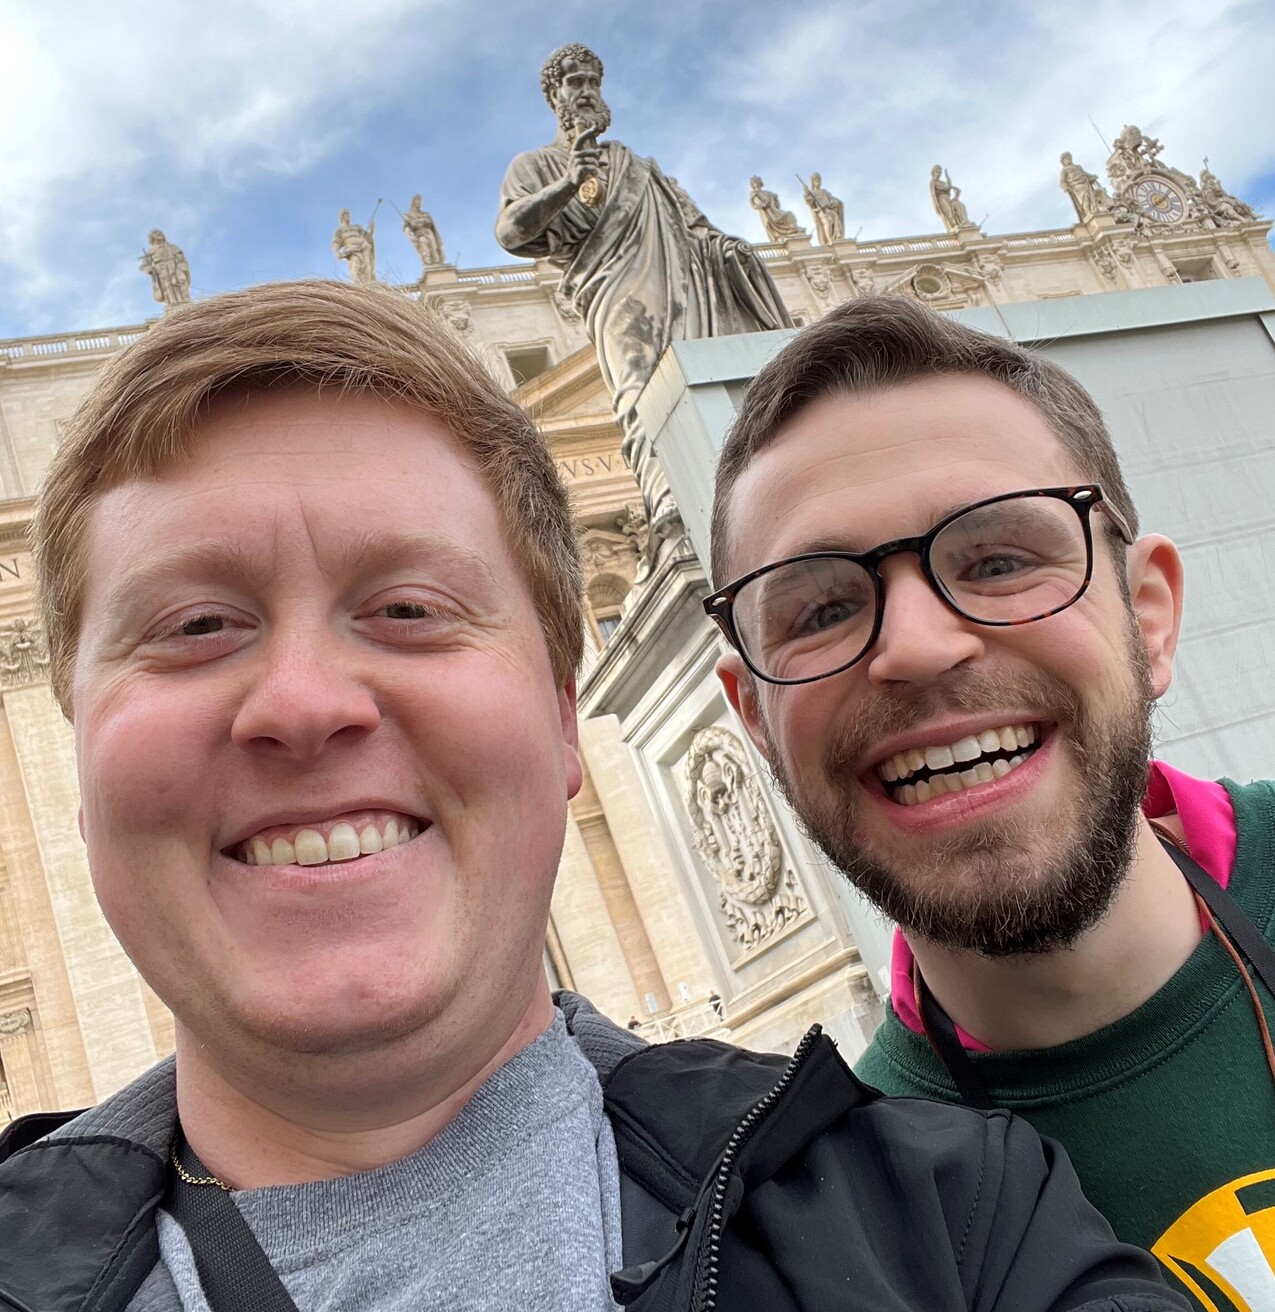 Day 3: Basilica, church tours are highlights for seminary group